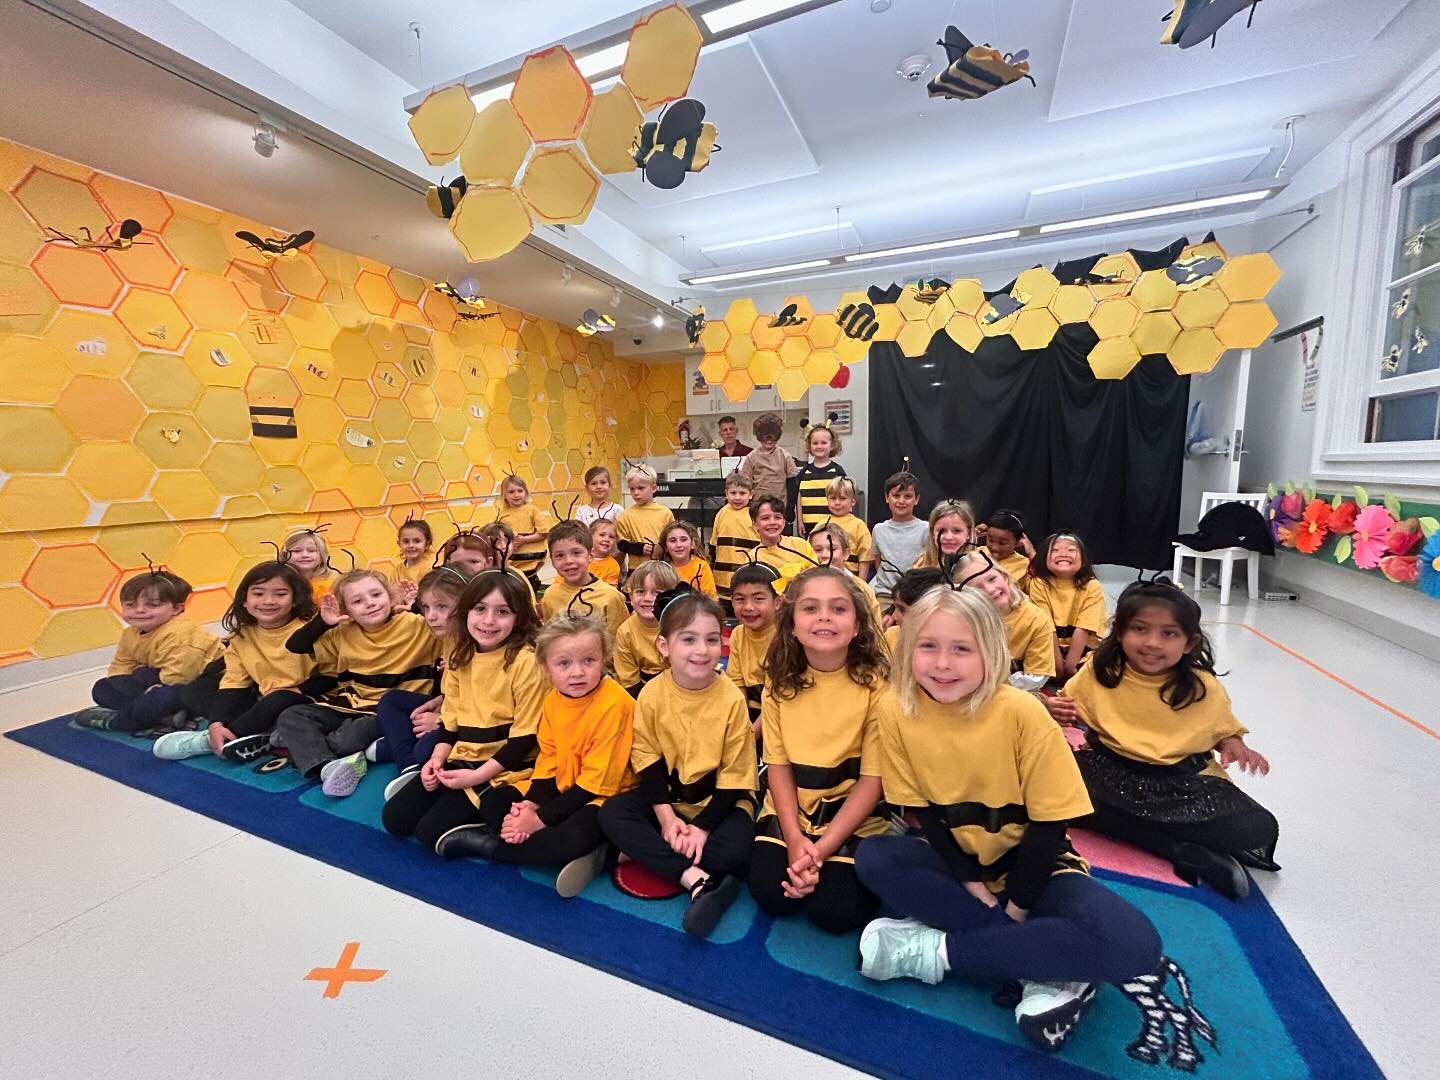 Our whole classroom is BUZZING in honor of our spring play, Life in the Hive. We&rsquo;ve learned a ton about bees, covered our walls in honeycomb, and even dressed the part! We could not be more impressed by all their hard work, you should BEE very 